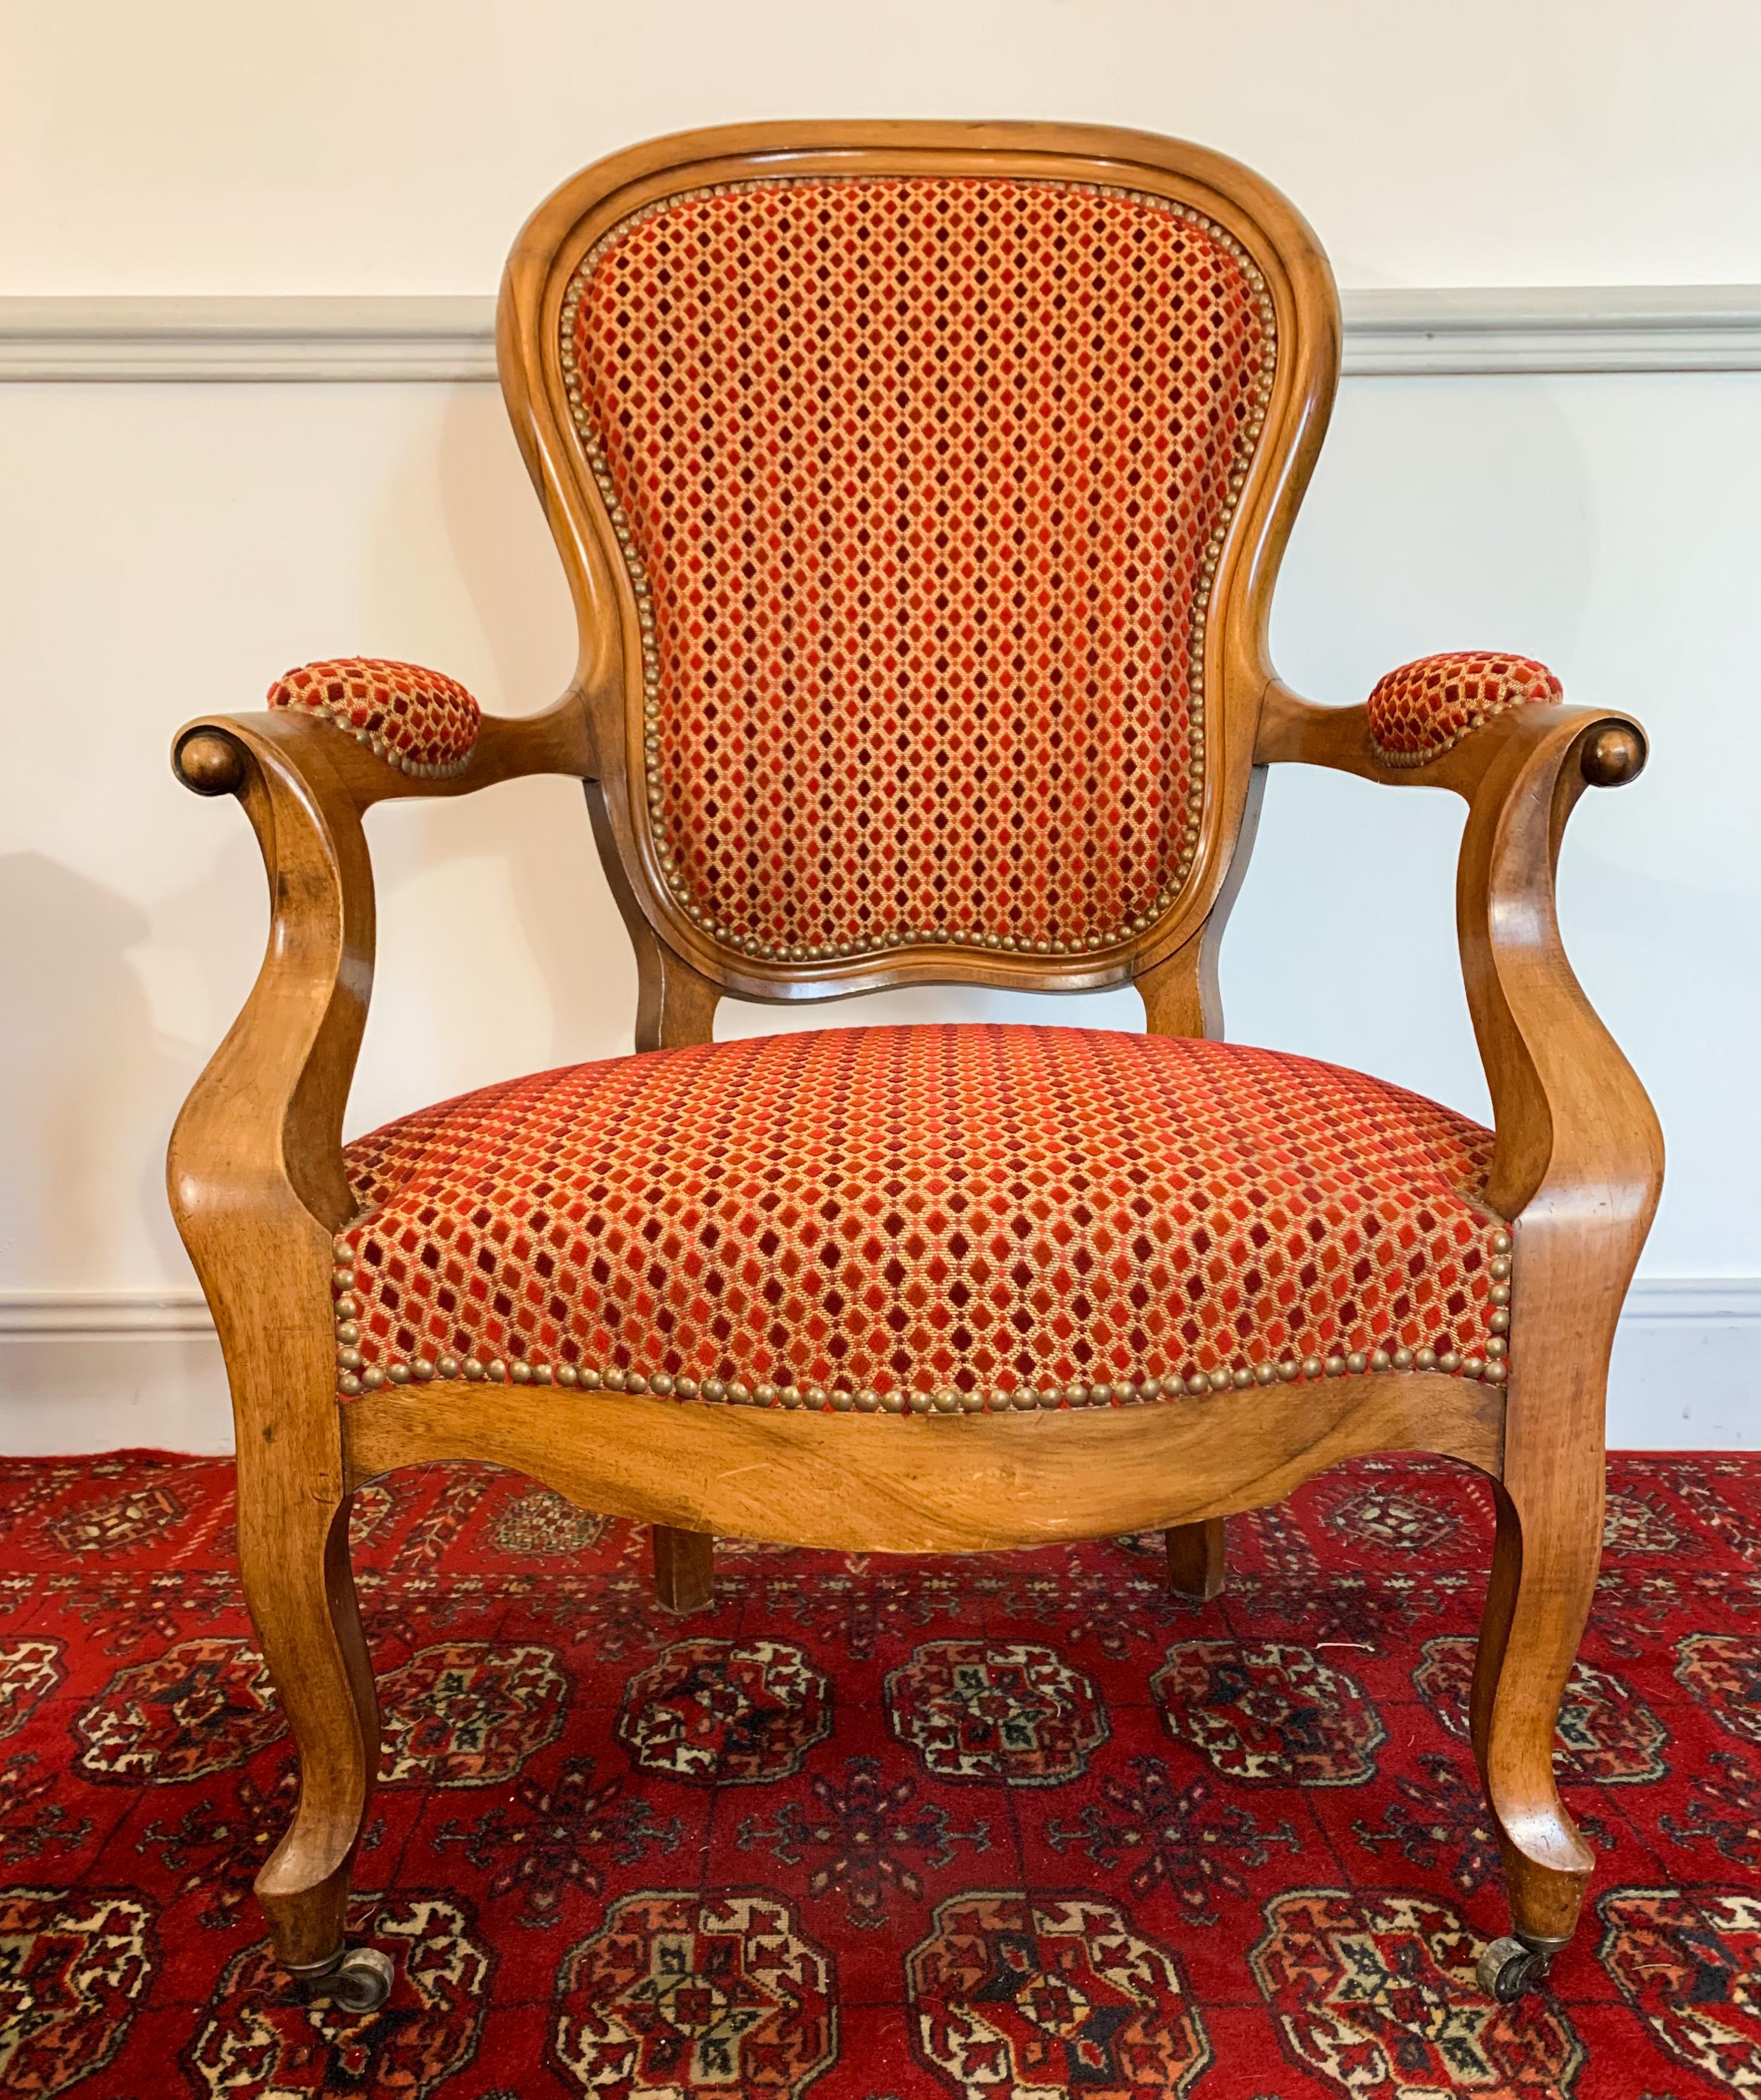 Beautifull Louis 15 style walnut cabriolet cabriolet from Louis-Philippe period. Its front legs are curved and end with casters. The armrests have volutes bringing a certain elegance. 
It has a beautiful red and orange embossed velvet tapestry.